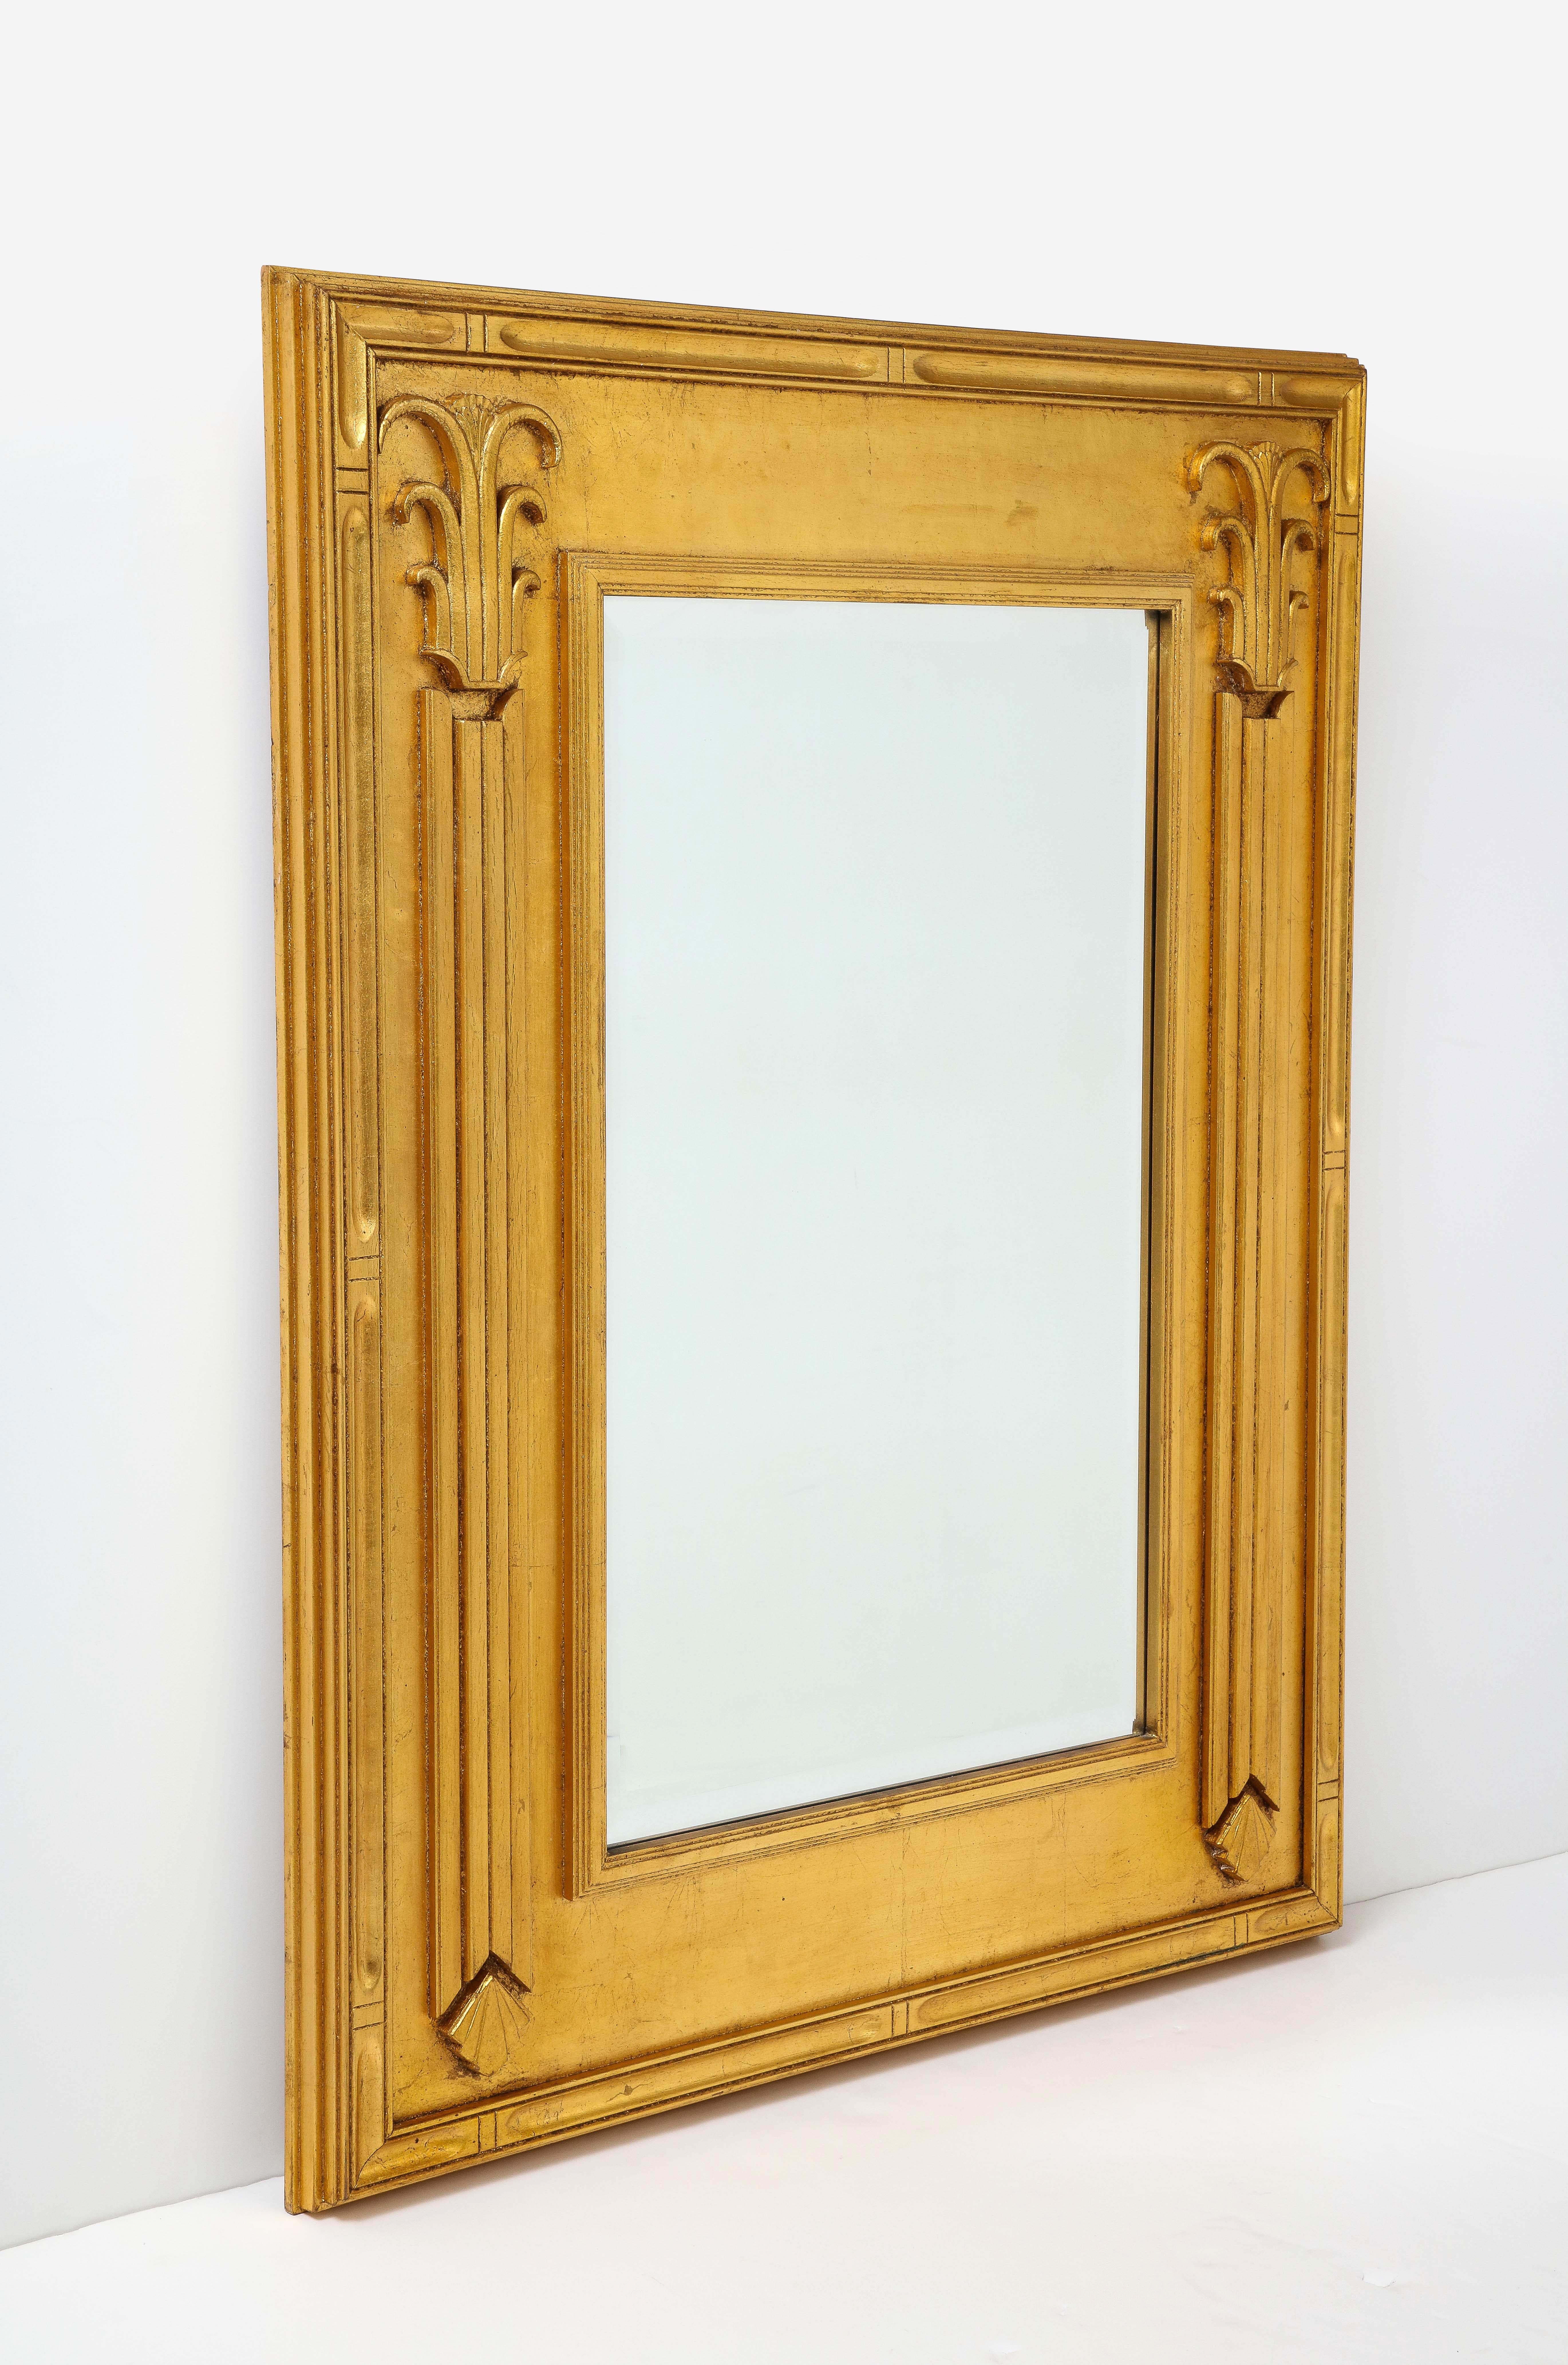 1980's Jay Spectre designed Art-deco style gilt wall mirror, in vintage original condition with some wear and patina due to age and use.